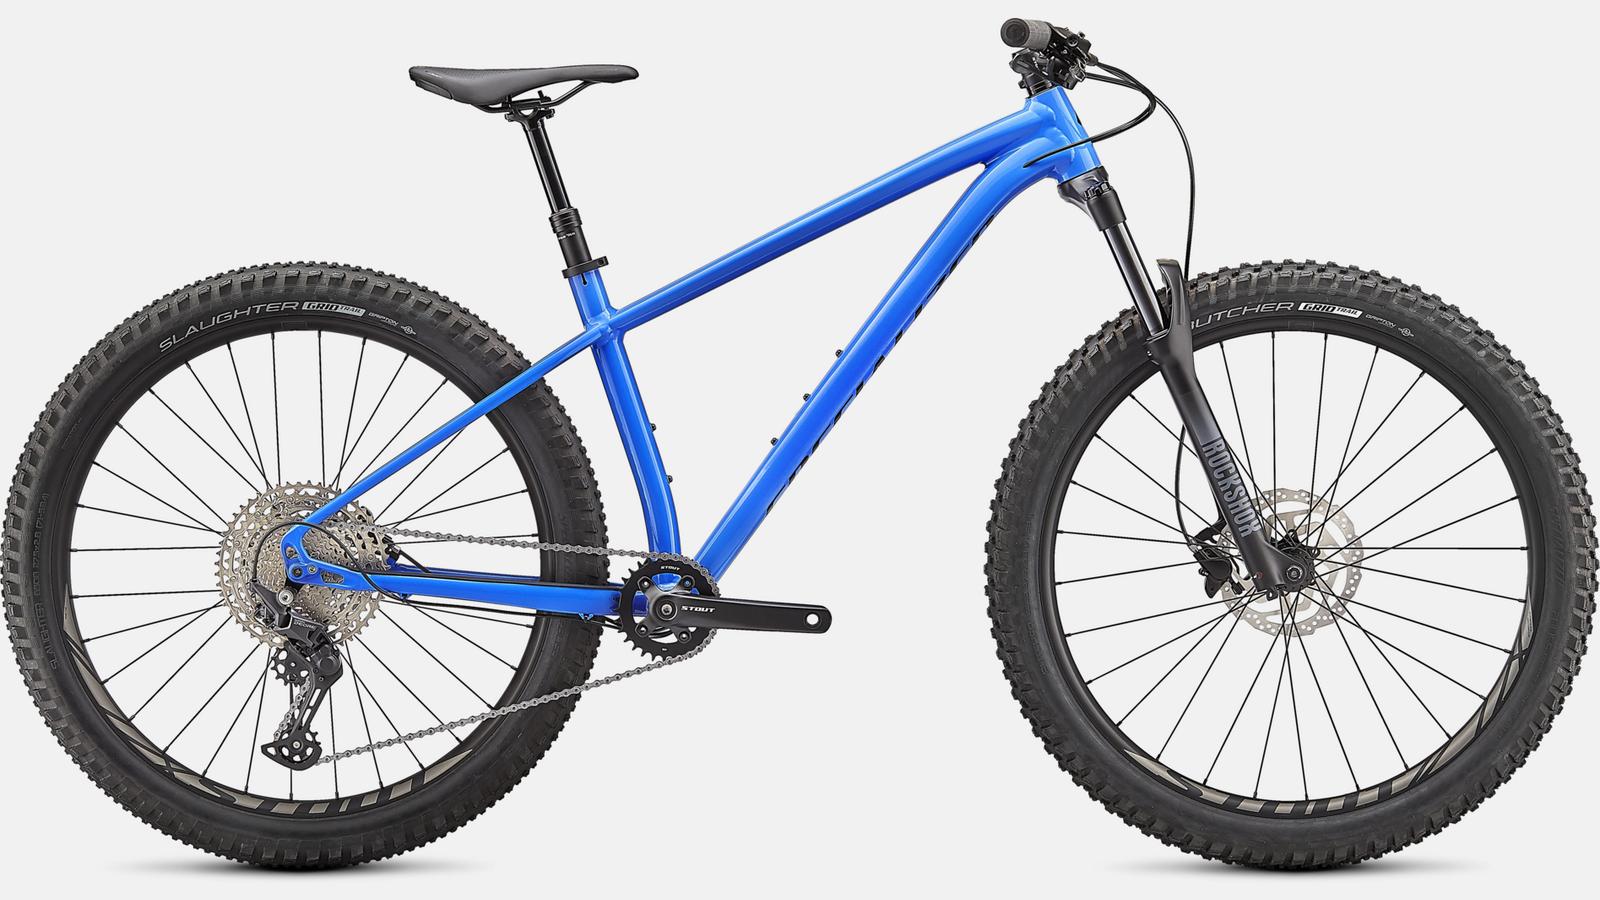 Paint for 2021 Specialized Fuse 27.5 - Gloss Sky Blue